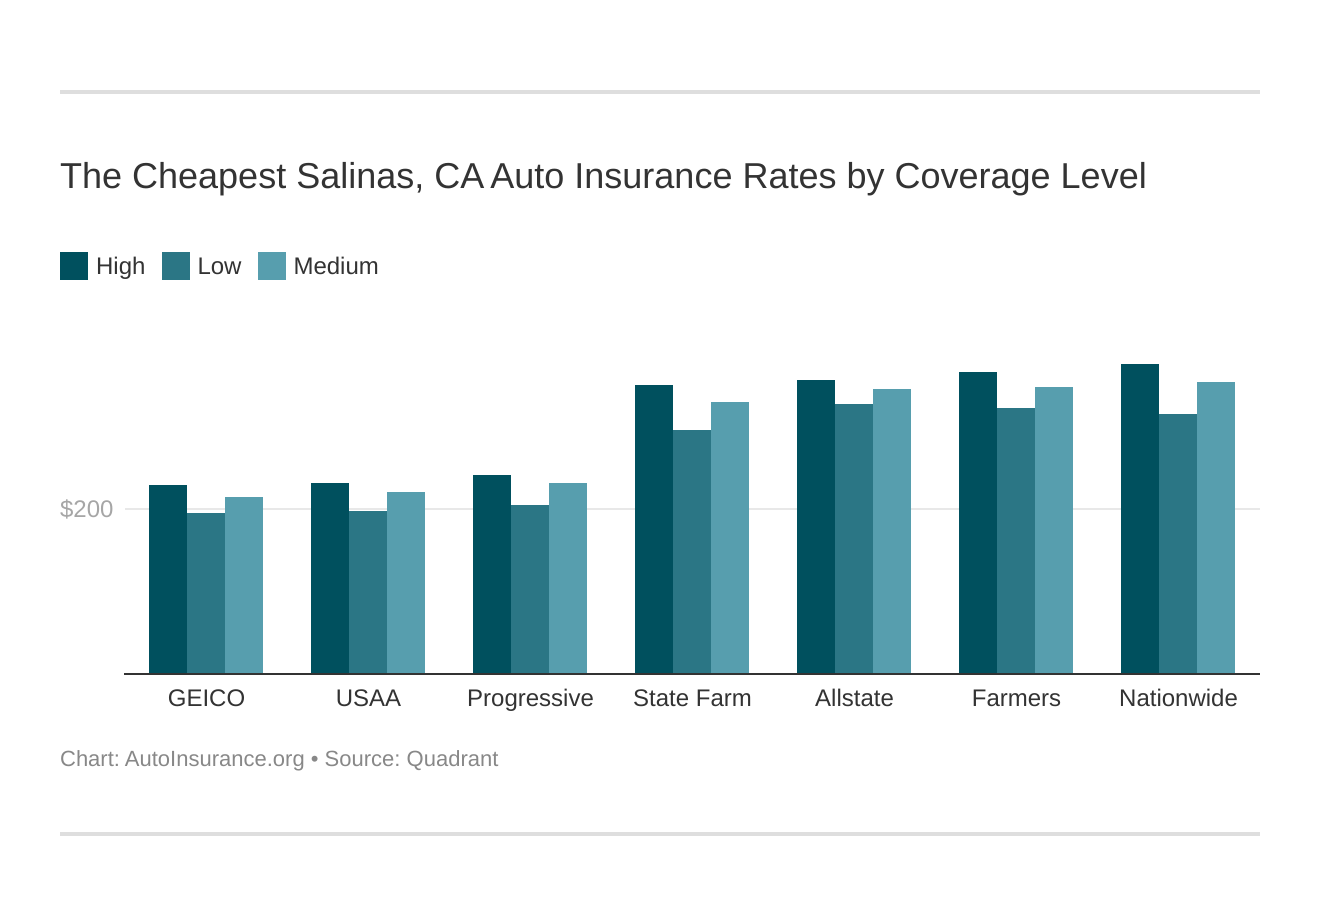 The Cheapest Salinas, CA Auto Insurance Rates by Coverage Level